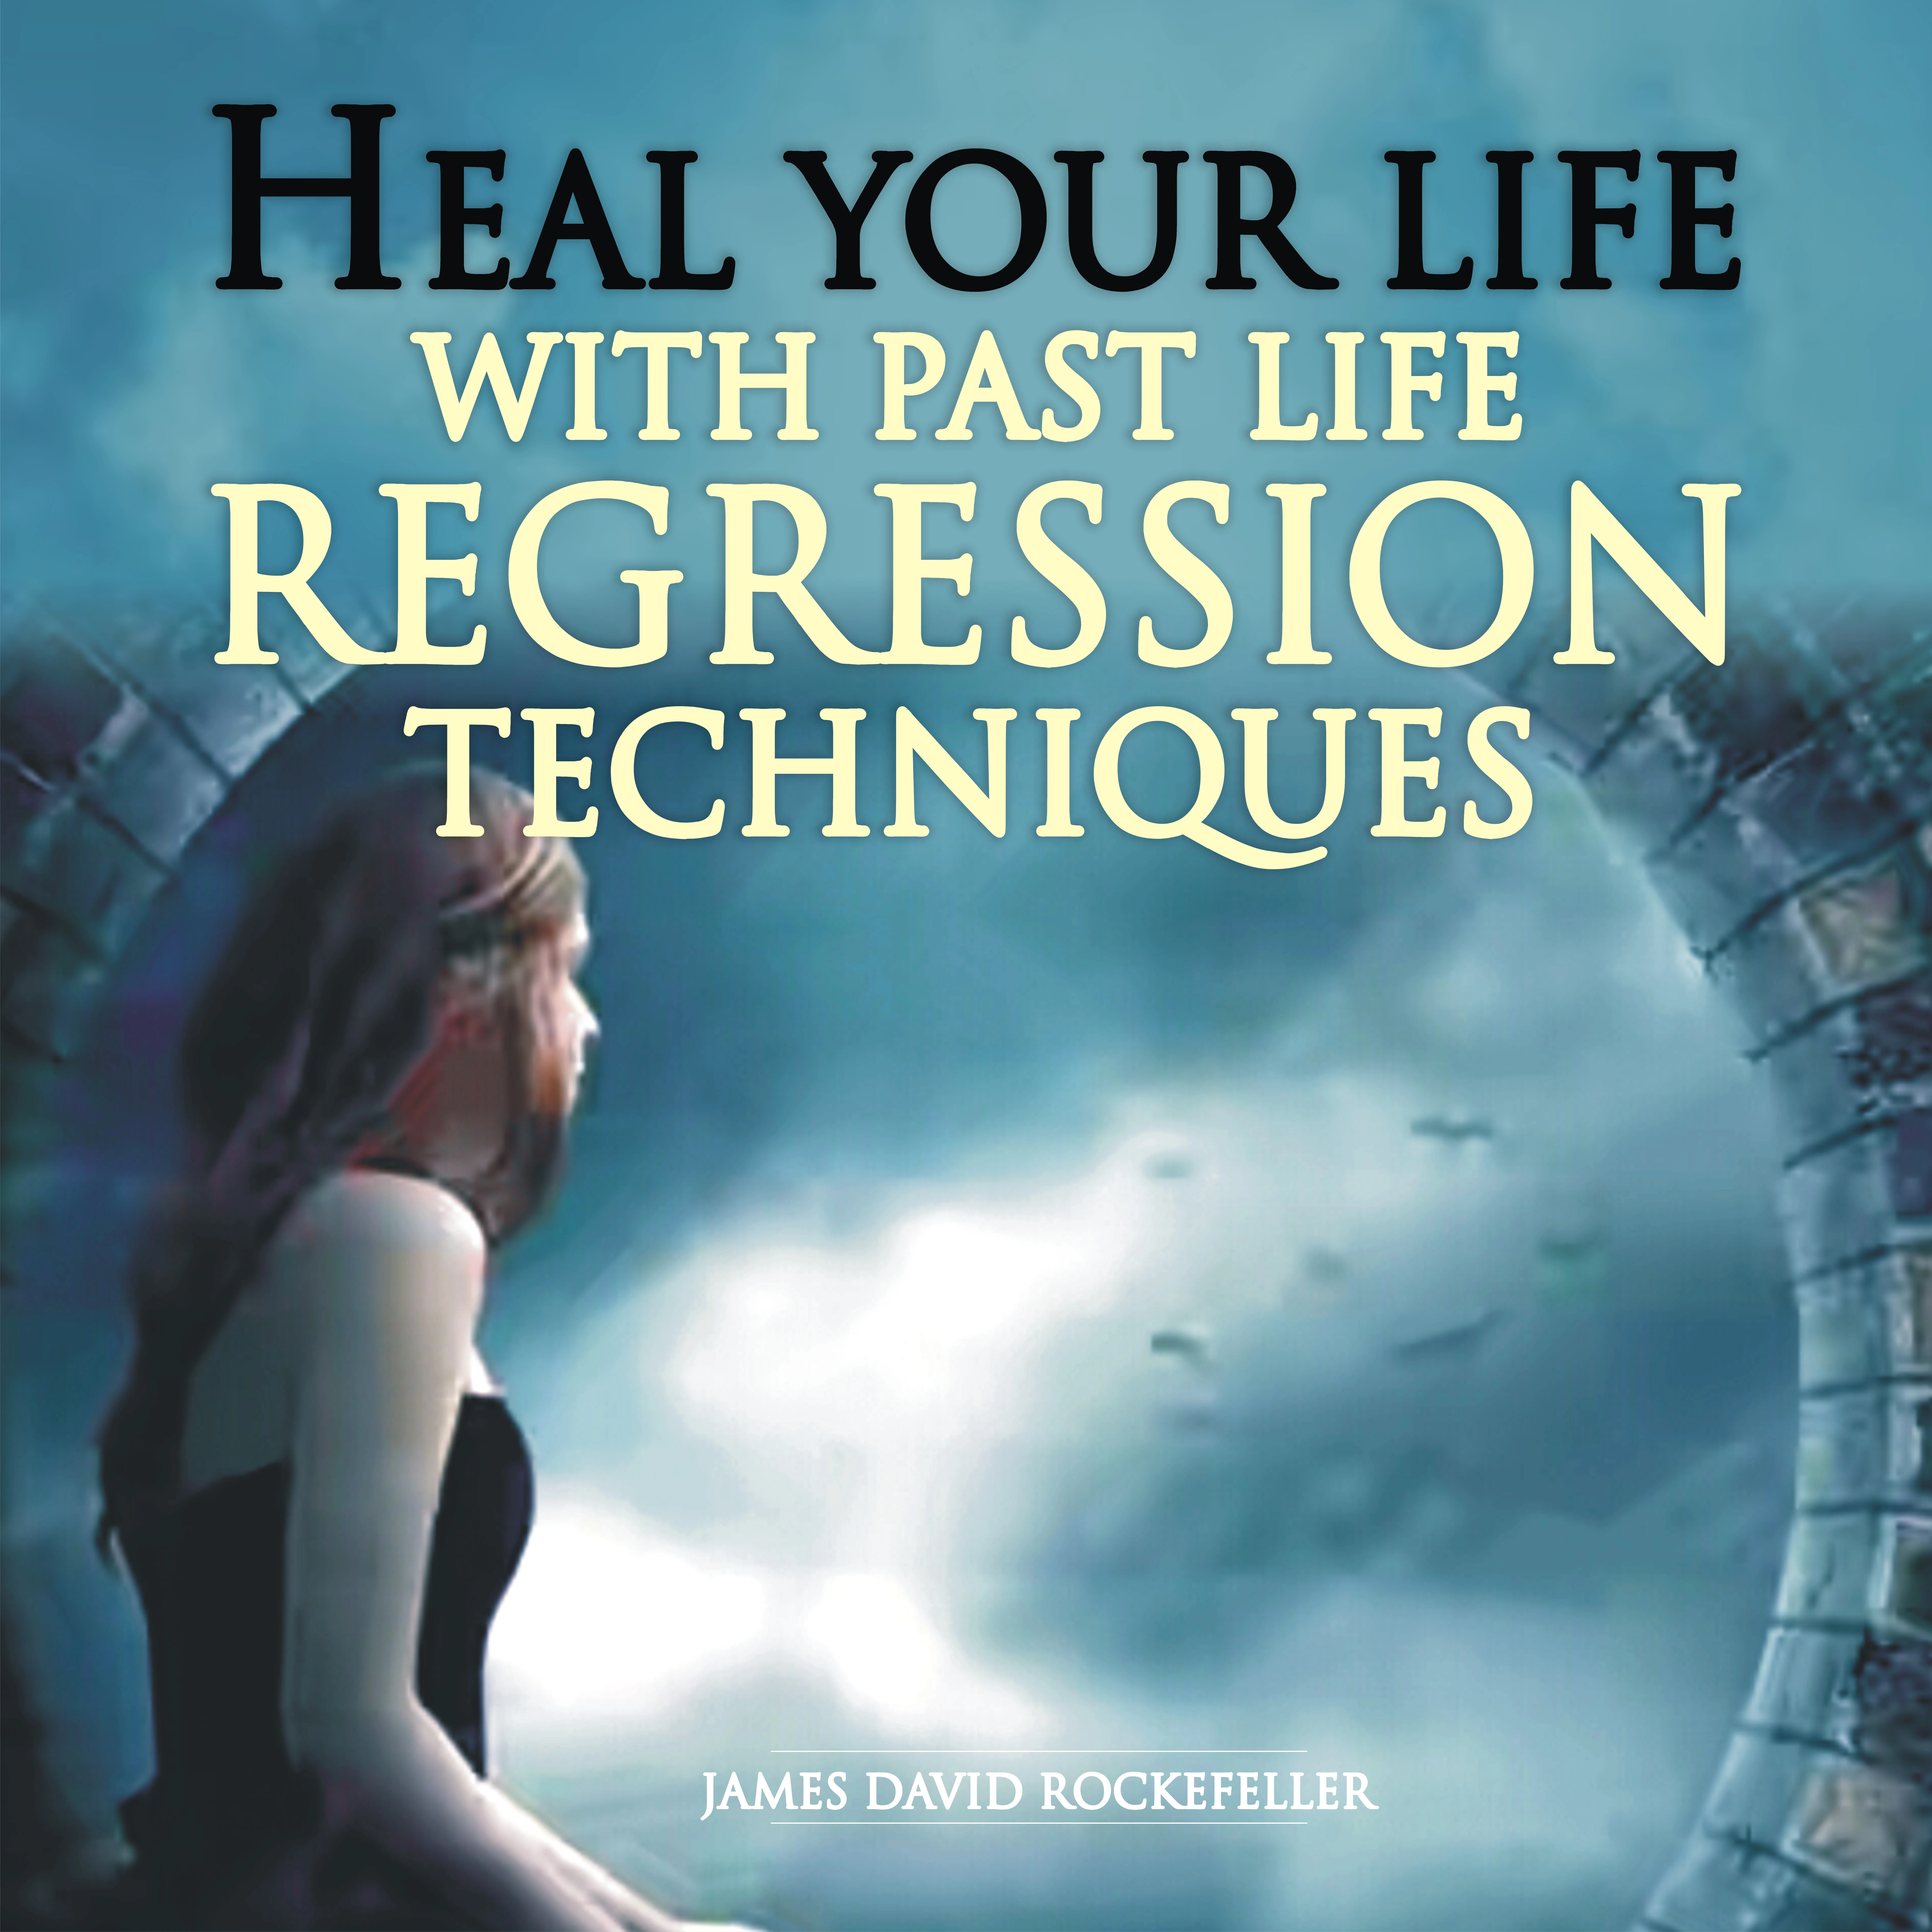 Heal Your Life with Past Life Regression Techniques Audiobook by James David Rockefeller